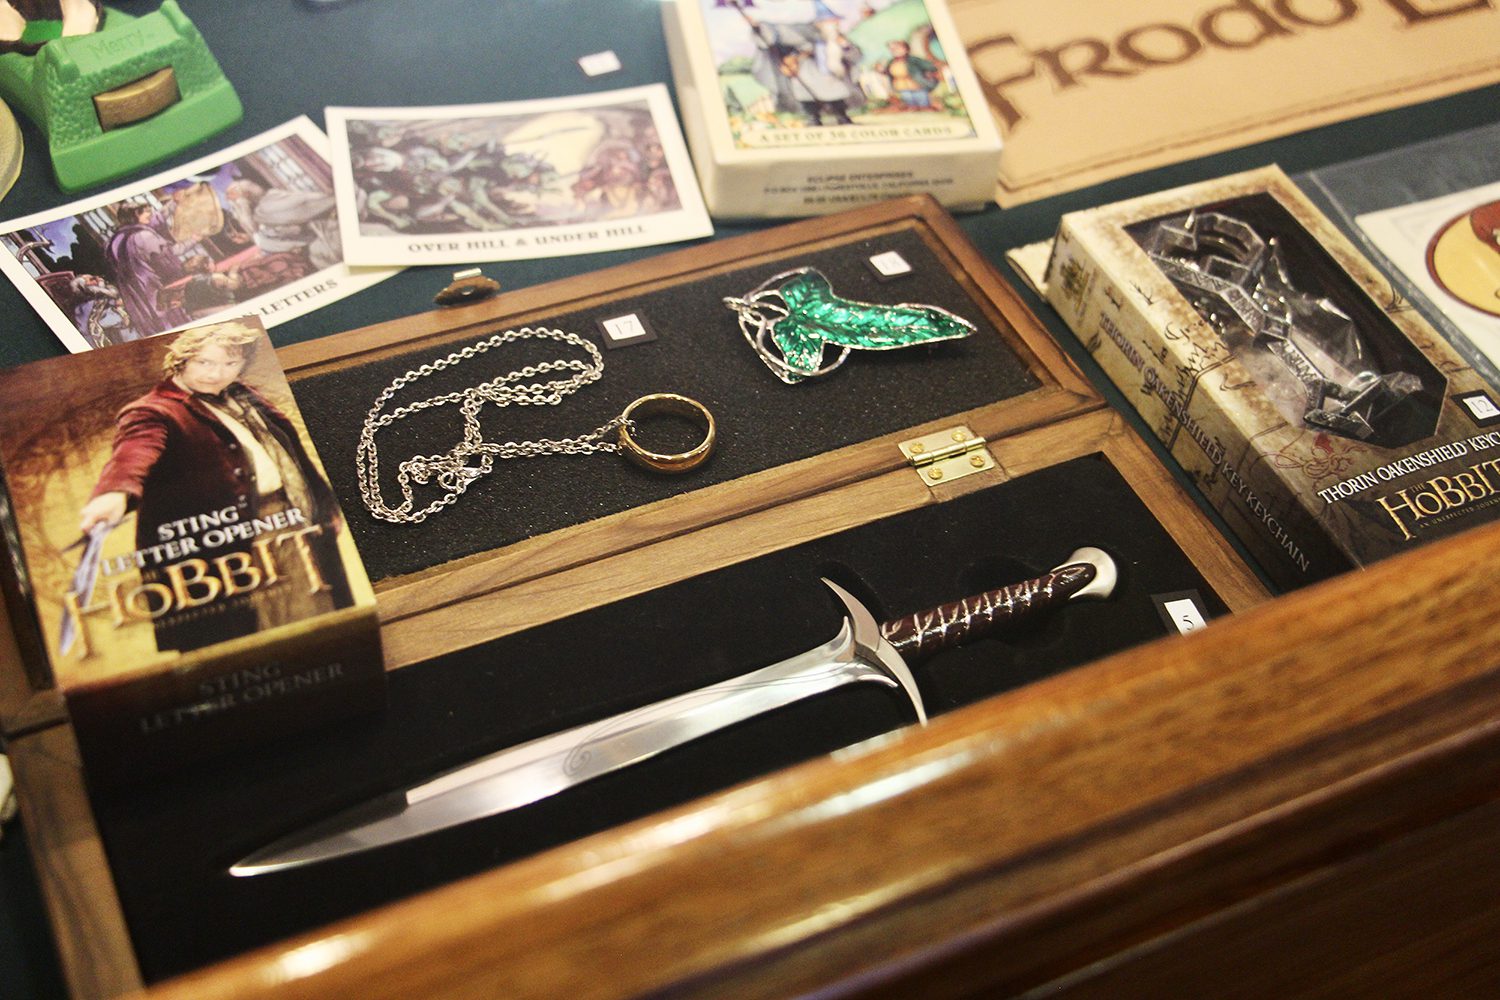 The Marion E. Wade Center at Wheaton College includes a wide variety of memorabilia including cards, miniature swords and other decorations symbolic of The Hobbit and The Lord of the Rings series. RNS Photo by Emily Miller